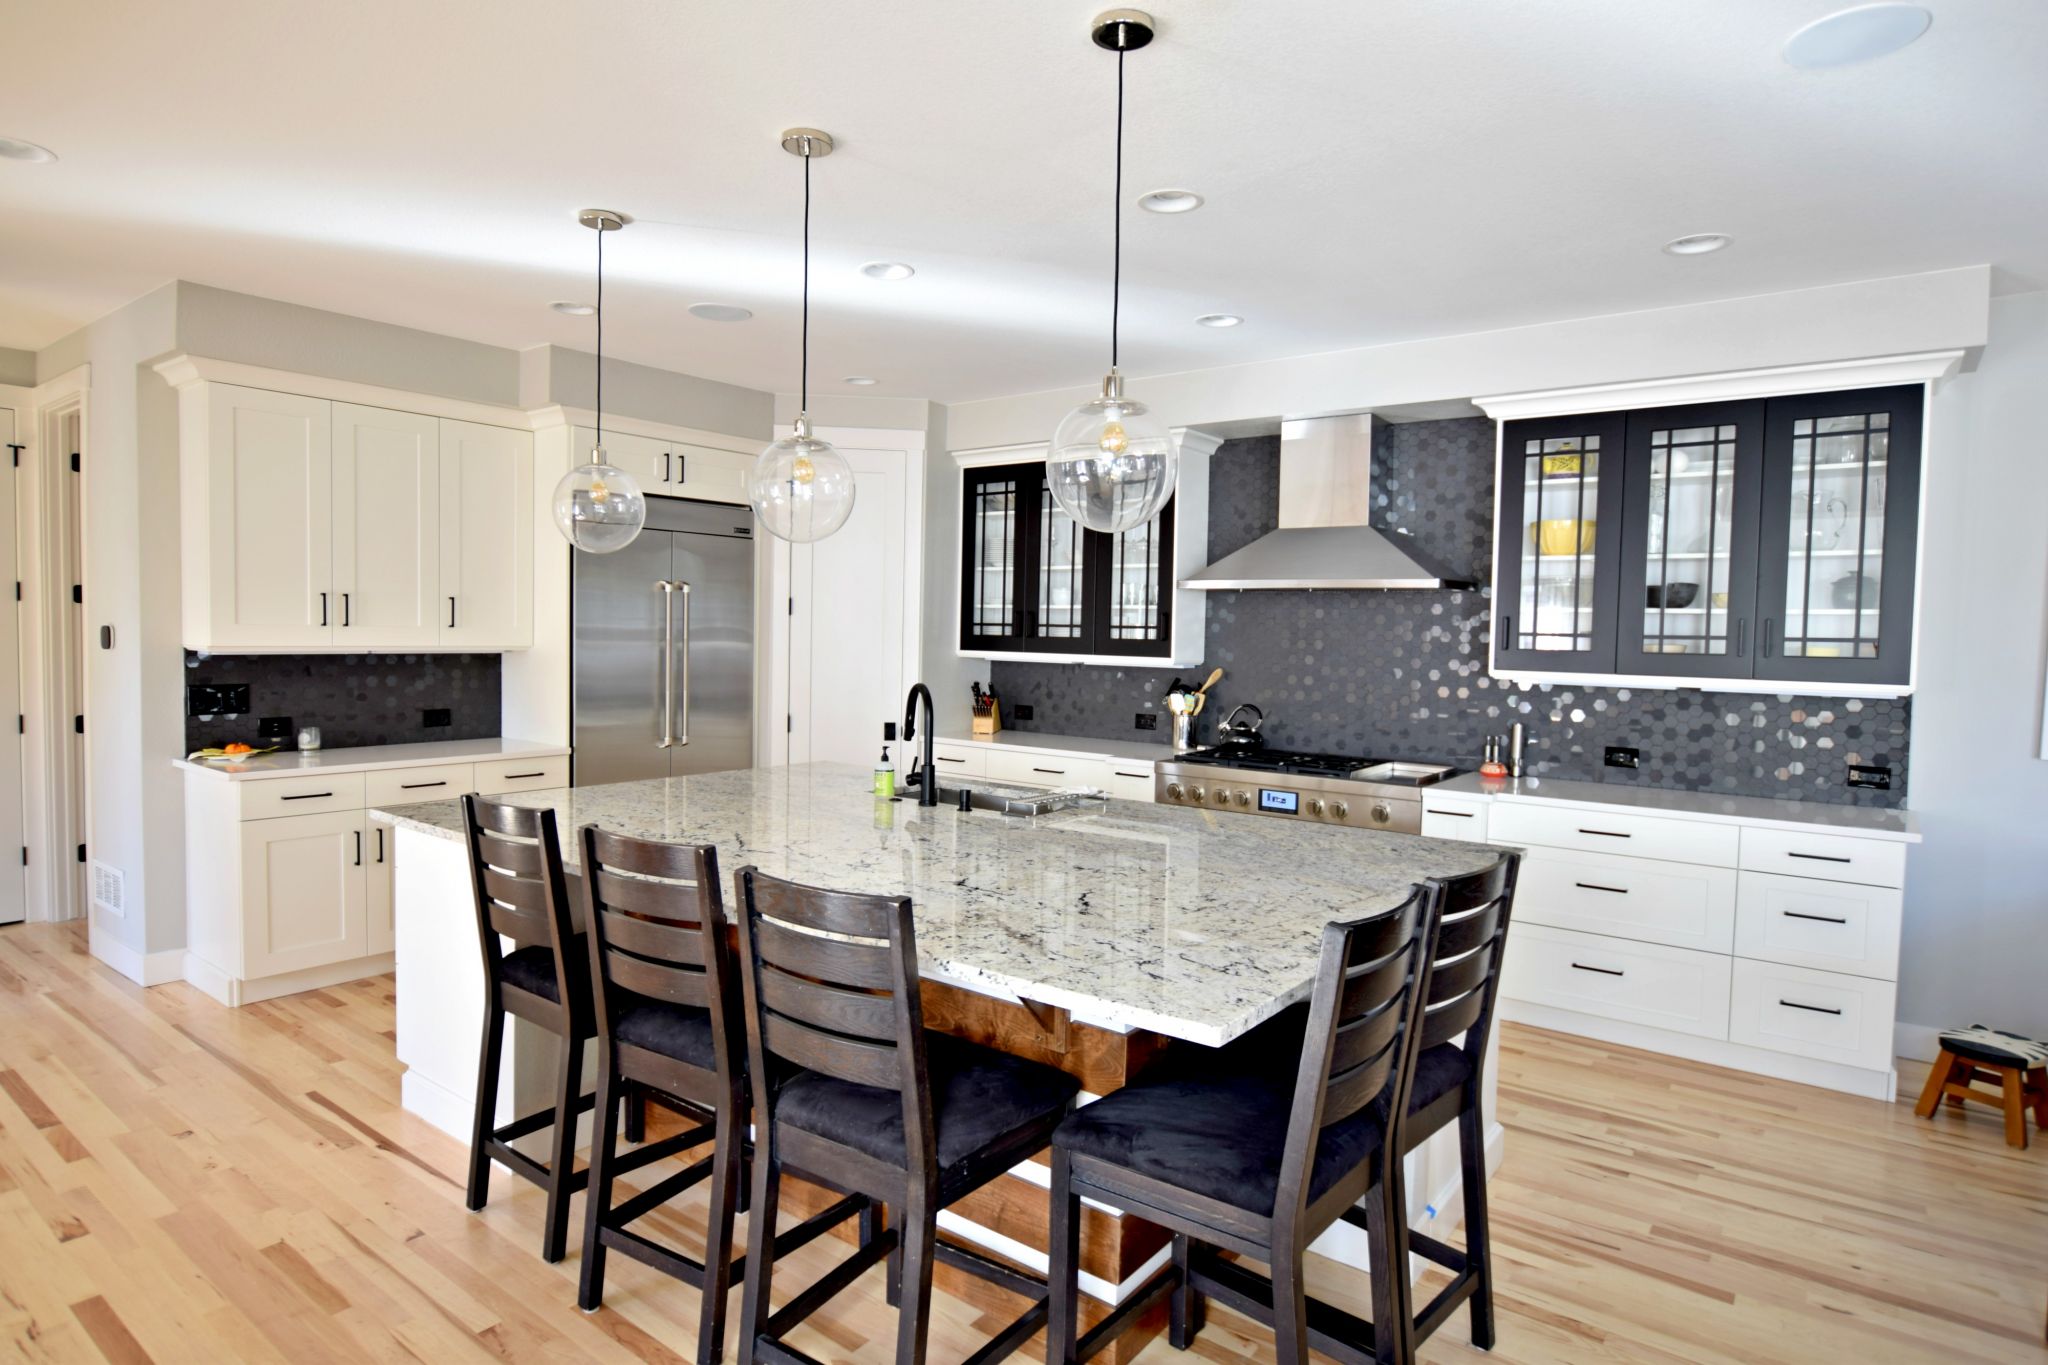 White and gray kitchen cabinets and large center island